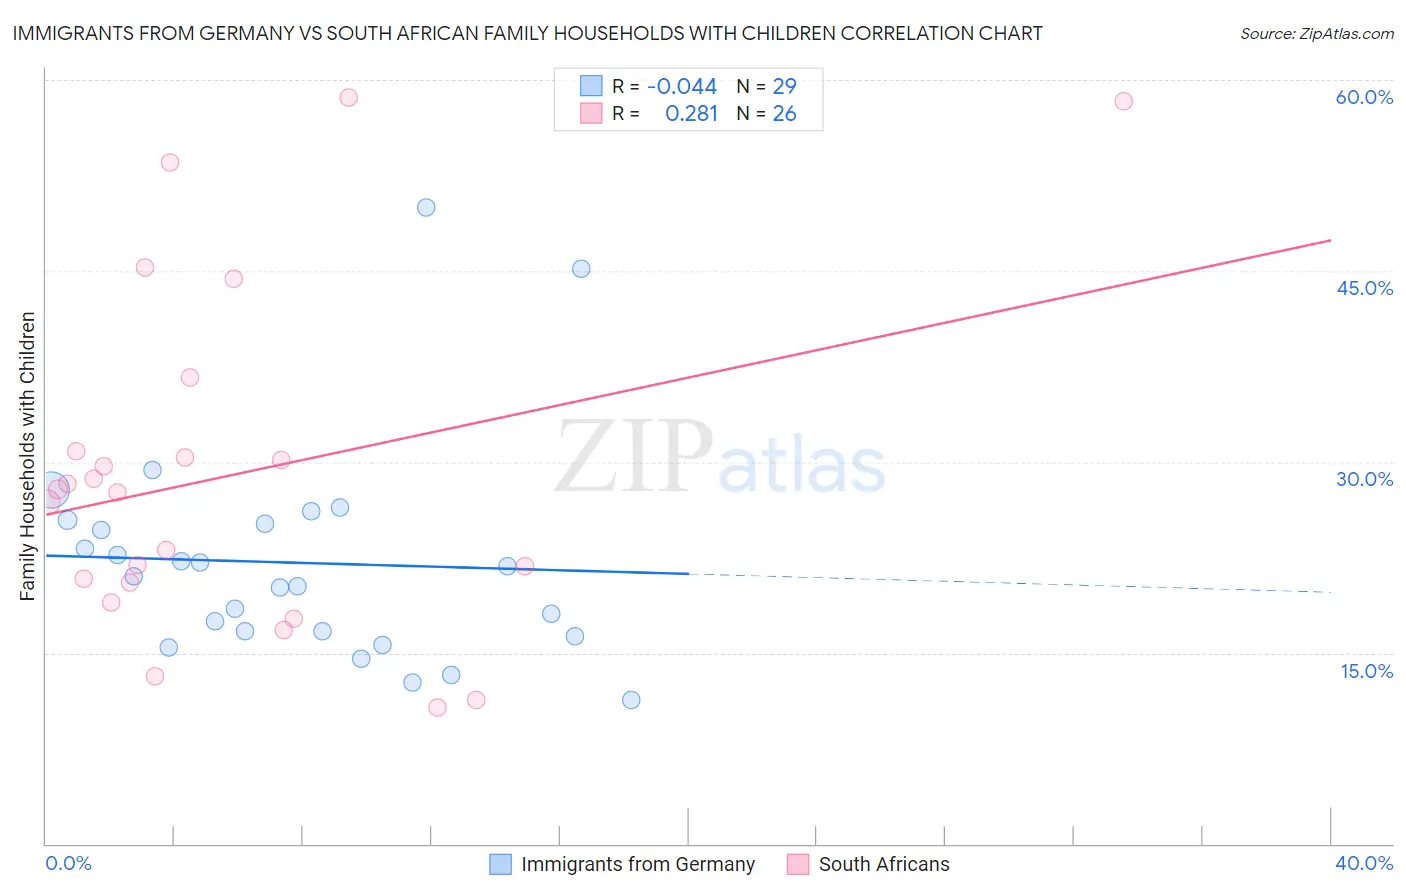 Immigrants from Germany vs South African Family Households with Children